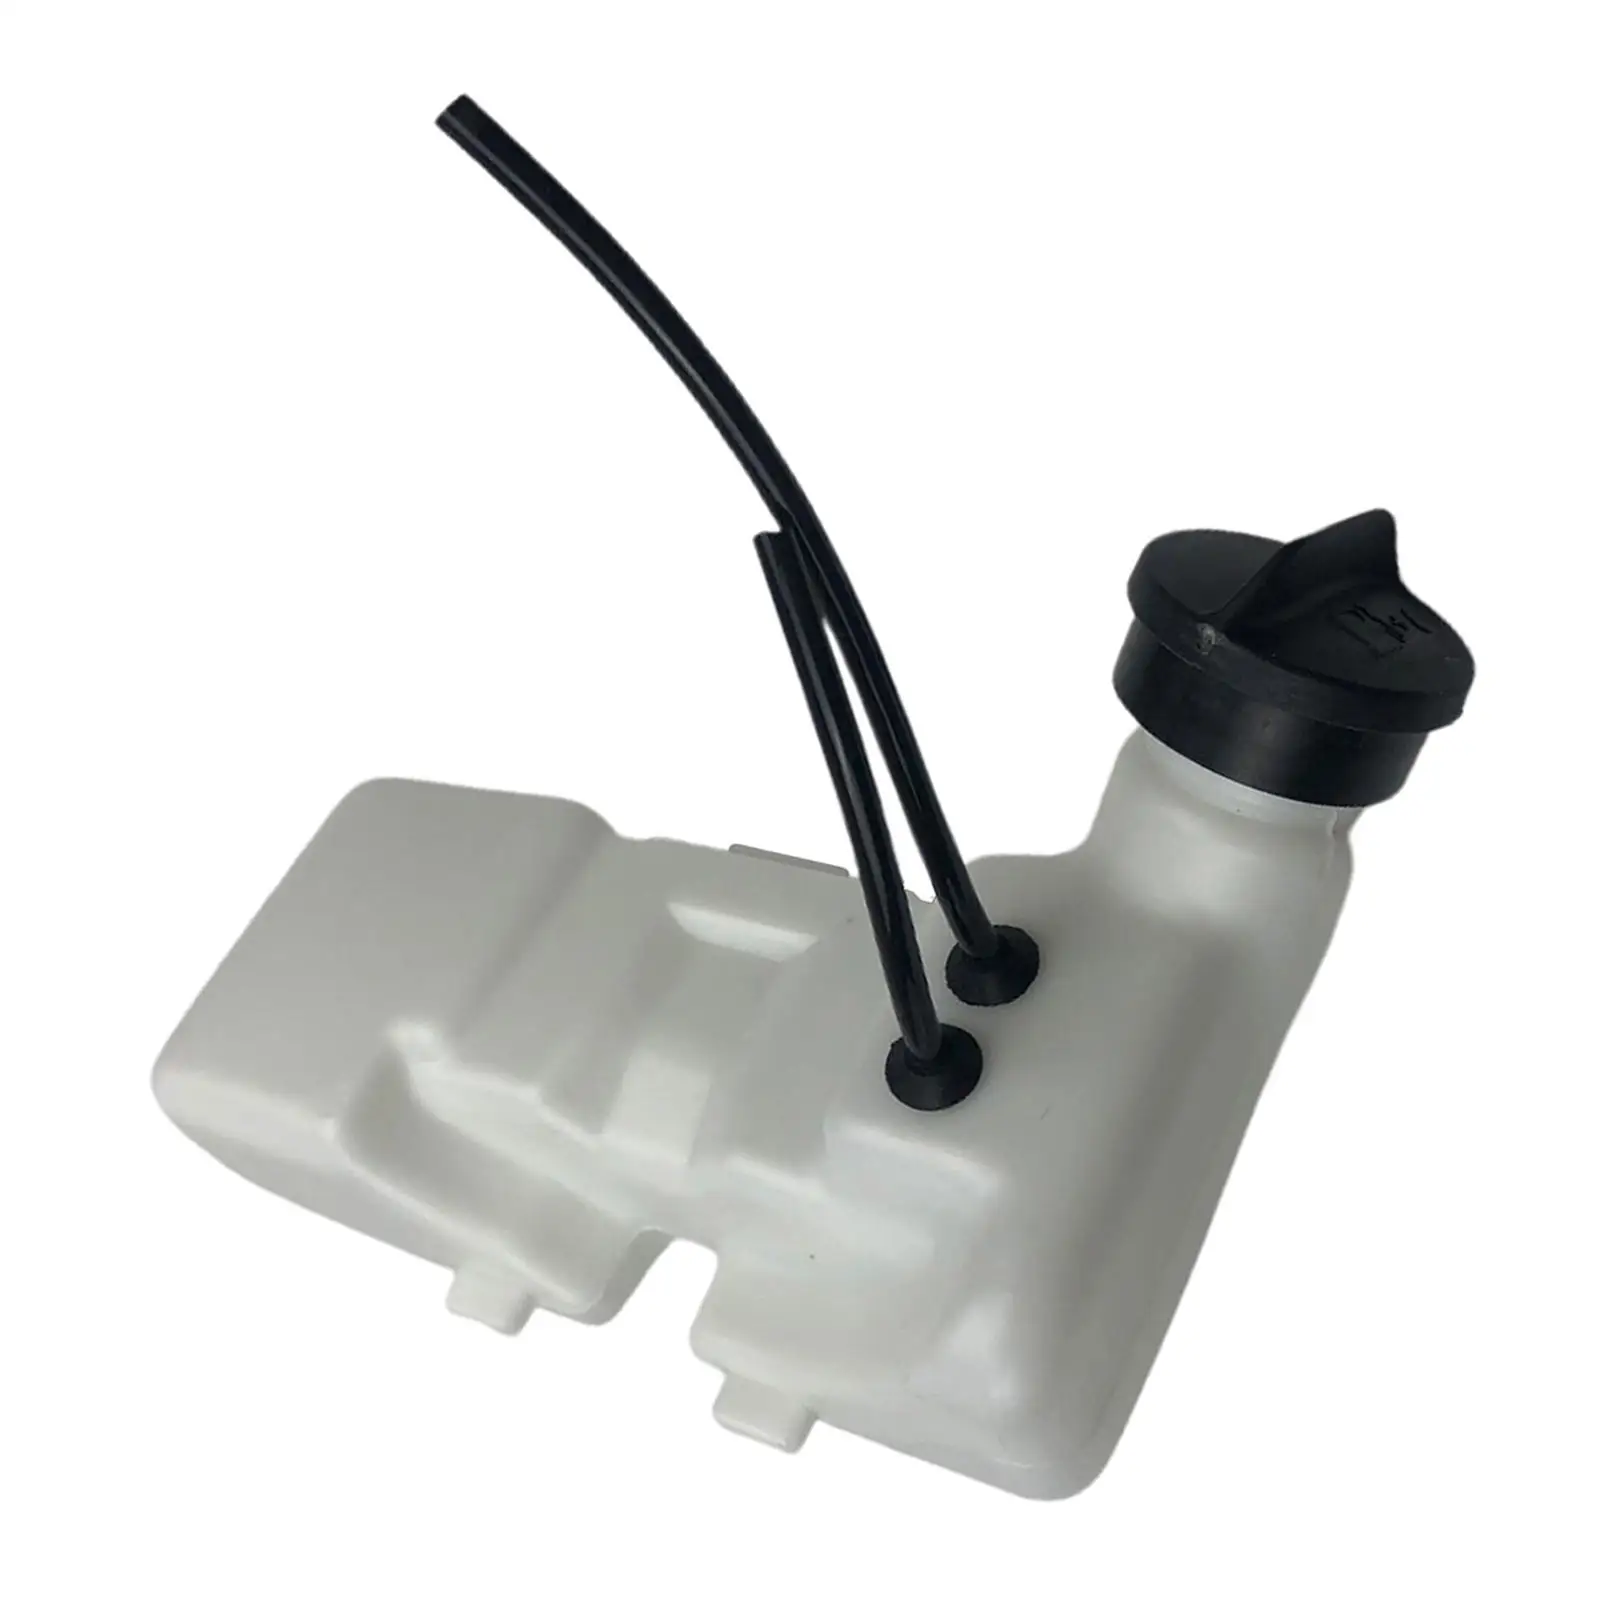 New Replacement Gas Fuel Tank with Cap Assembly for Stihl FS80R FS80 FS75 FS76 FS74 FS72 FS85 KM85 HT75 Trimmer Parts